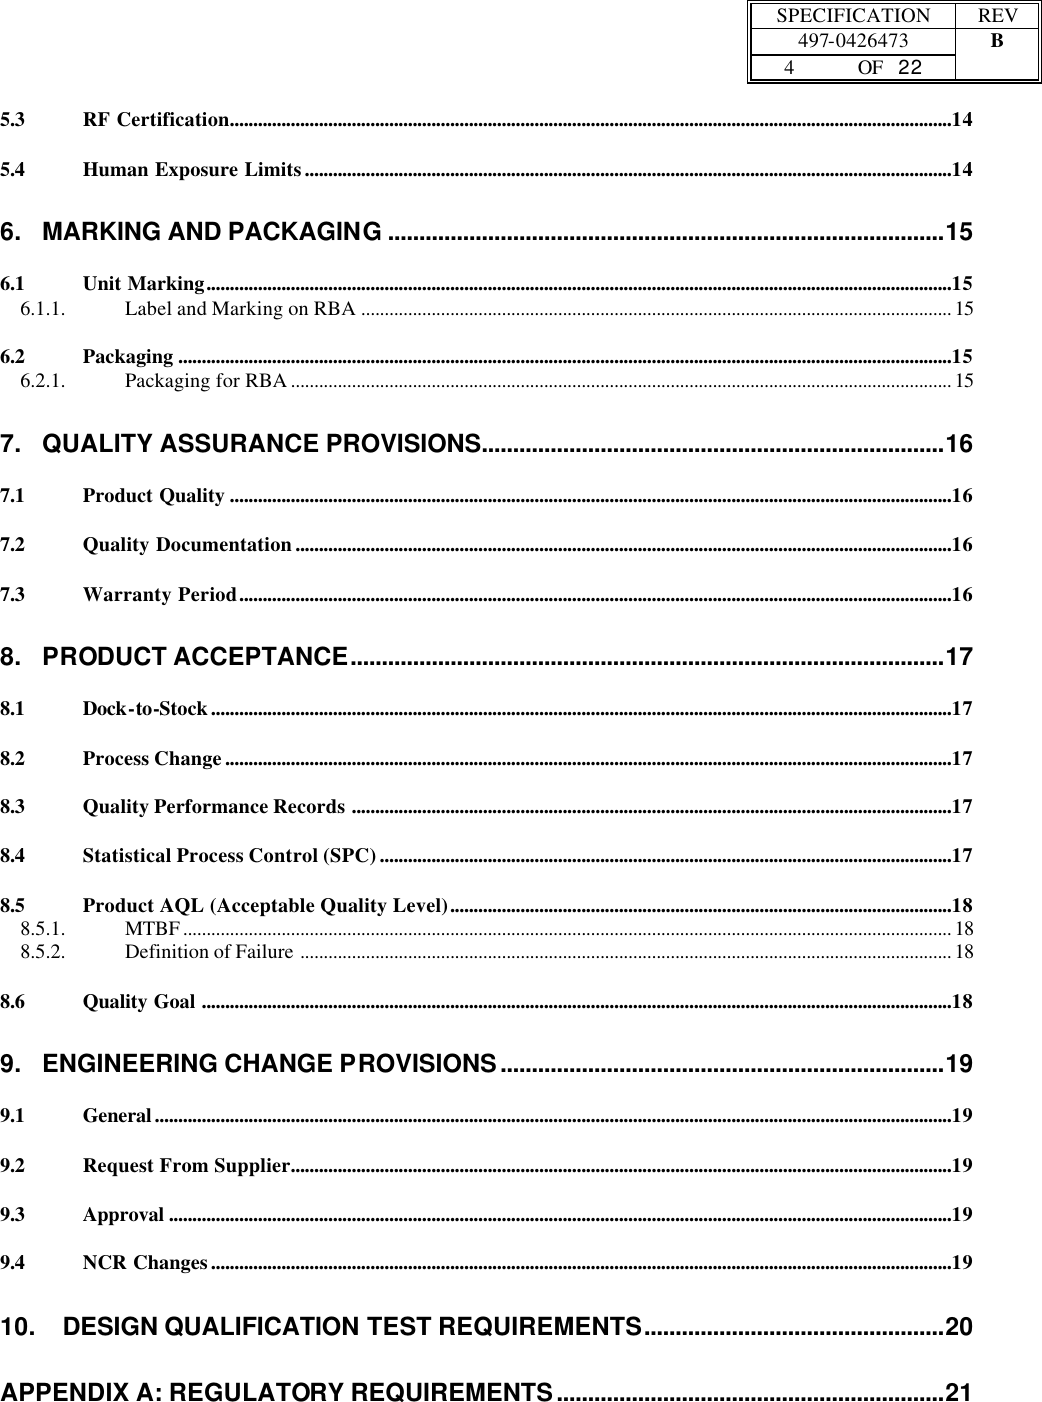  SPECIFICATION REV  497-0426473 B  4 OF   22    5.3 RF Certification..........................................................................................................................................................14 5.4 Human Exposure Limits..........................................................................................................................................14 6. MARKING AND PACKAGING .........................................................................................15 6.1 Unit Marking...............................................................................................................................................................15 6.1.1. Label and Marking on RBA .............................................................................................................................. 15 6.2 Packaging .....................................................................................................................................................................15 6.2.1. Packaging for RBA ............................................................................................................................................. 15 7. QUALITY ASSURANCE PROVISIONS..........................................................................16 7.1 Product Quality ..........................................................................................................................................................16 7.2 Quality Documentation............................................................................................................................................16 7.3 Warranty Period........................................................................................................................................................16 8. PRODUCT ACCEPTANCE...............................................................................................17 8.1 Dock-to-Stock..............................................................................................................................................................17 8.2 Process Change...........................................................................................................................................................17 8.3 Quality Performance Records ................................................................................................................................17 8.4 Statistical Process Control (SPC)..........................................................................................................................17 8.5 Product AQL (Acceptable Quality Level)...........................................................................................................18 8.5.1. MTBF .................................................................................................................................................................... 18 8.5.2. Definition of Failure ........................................................................................................................................... 18 8.6 Quality Goal ................................................................................................................................................................18 9. ENGINEERING CHANGE PROVISIONS.......................................................................19 9.1 General..........................................................................................................................................................................19 9.2 Request From Supplier.............................................................................................................................................19 9.3 Approval .......................................................................................................................................................................19 9.4 NCR Changes..............................................................................................................................................................19 10. DESIGN QUALIFICATION TEST REQUIREMENTS................................................20 APPENDIX A: REGULATORY REQUIREMENTS..............................................................21 